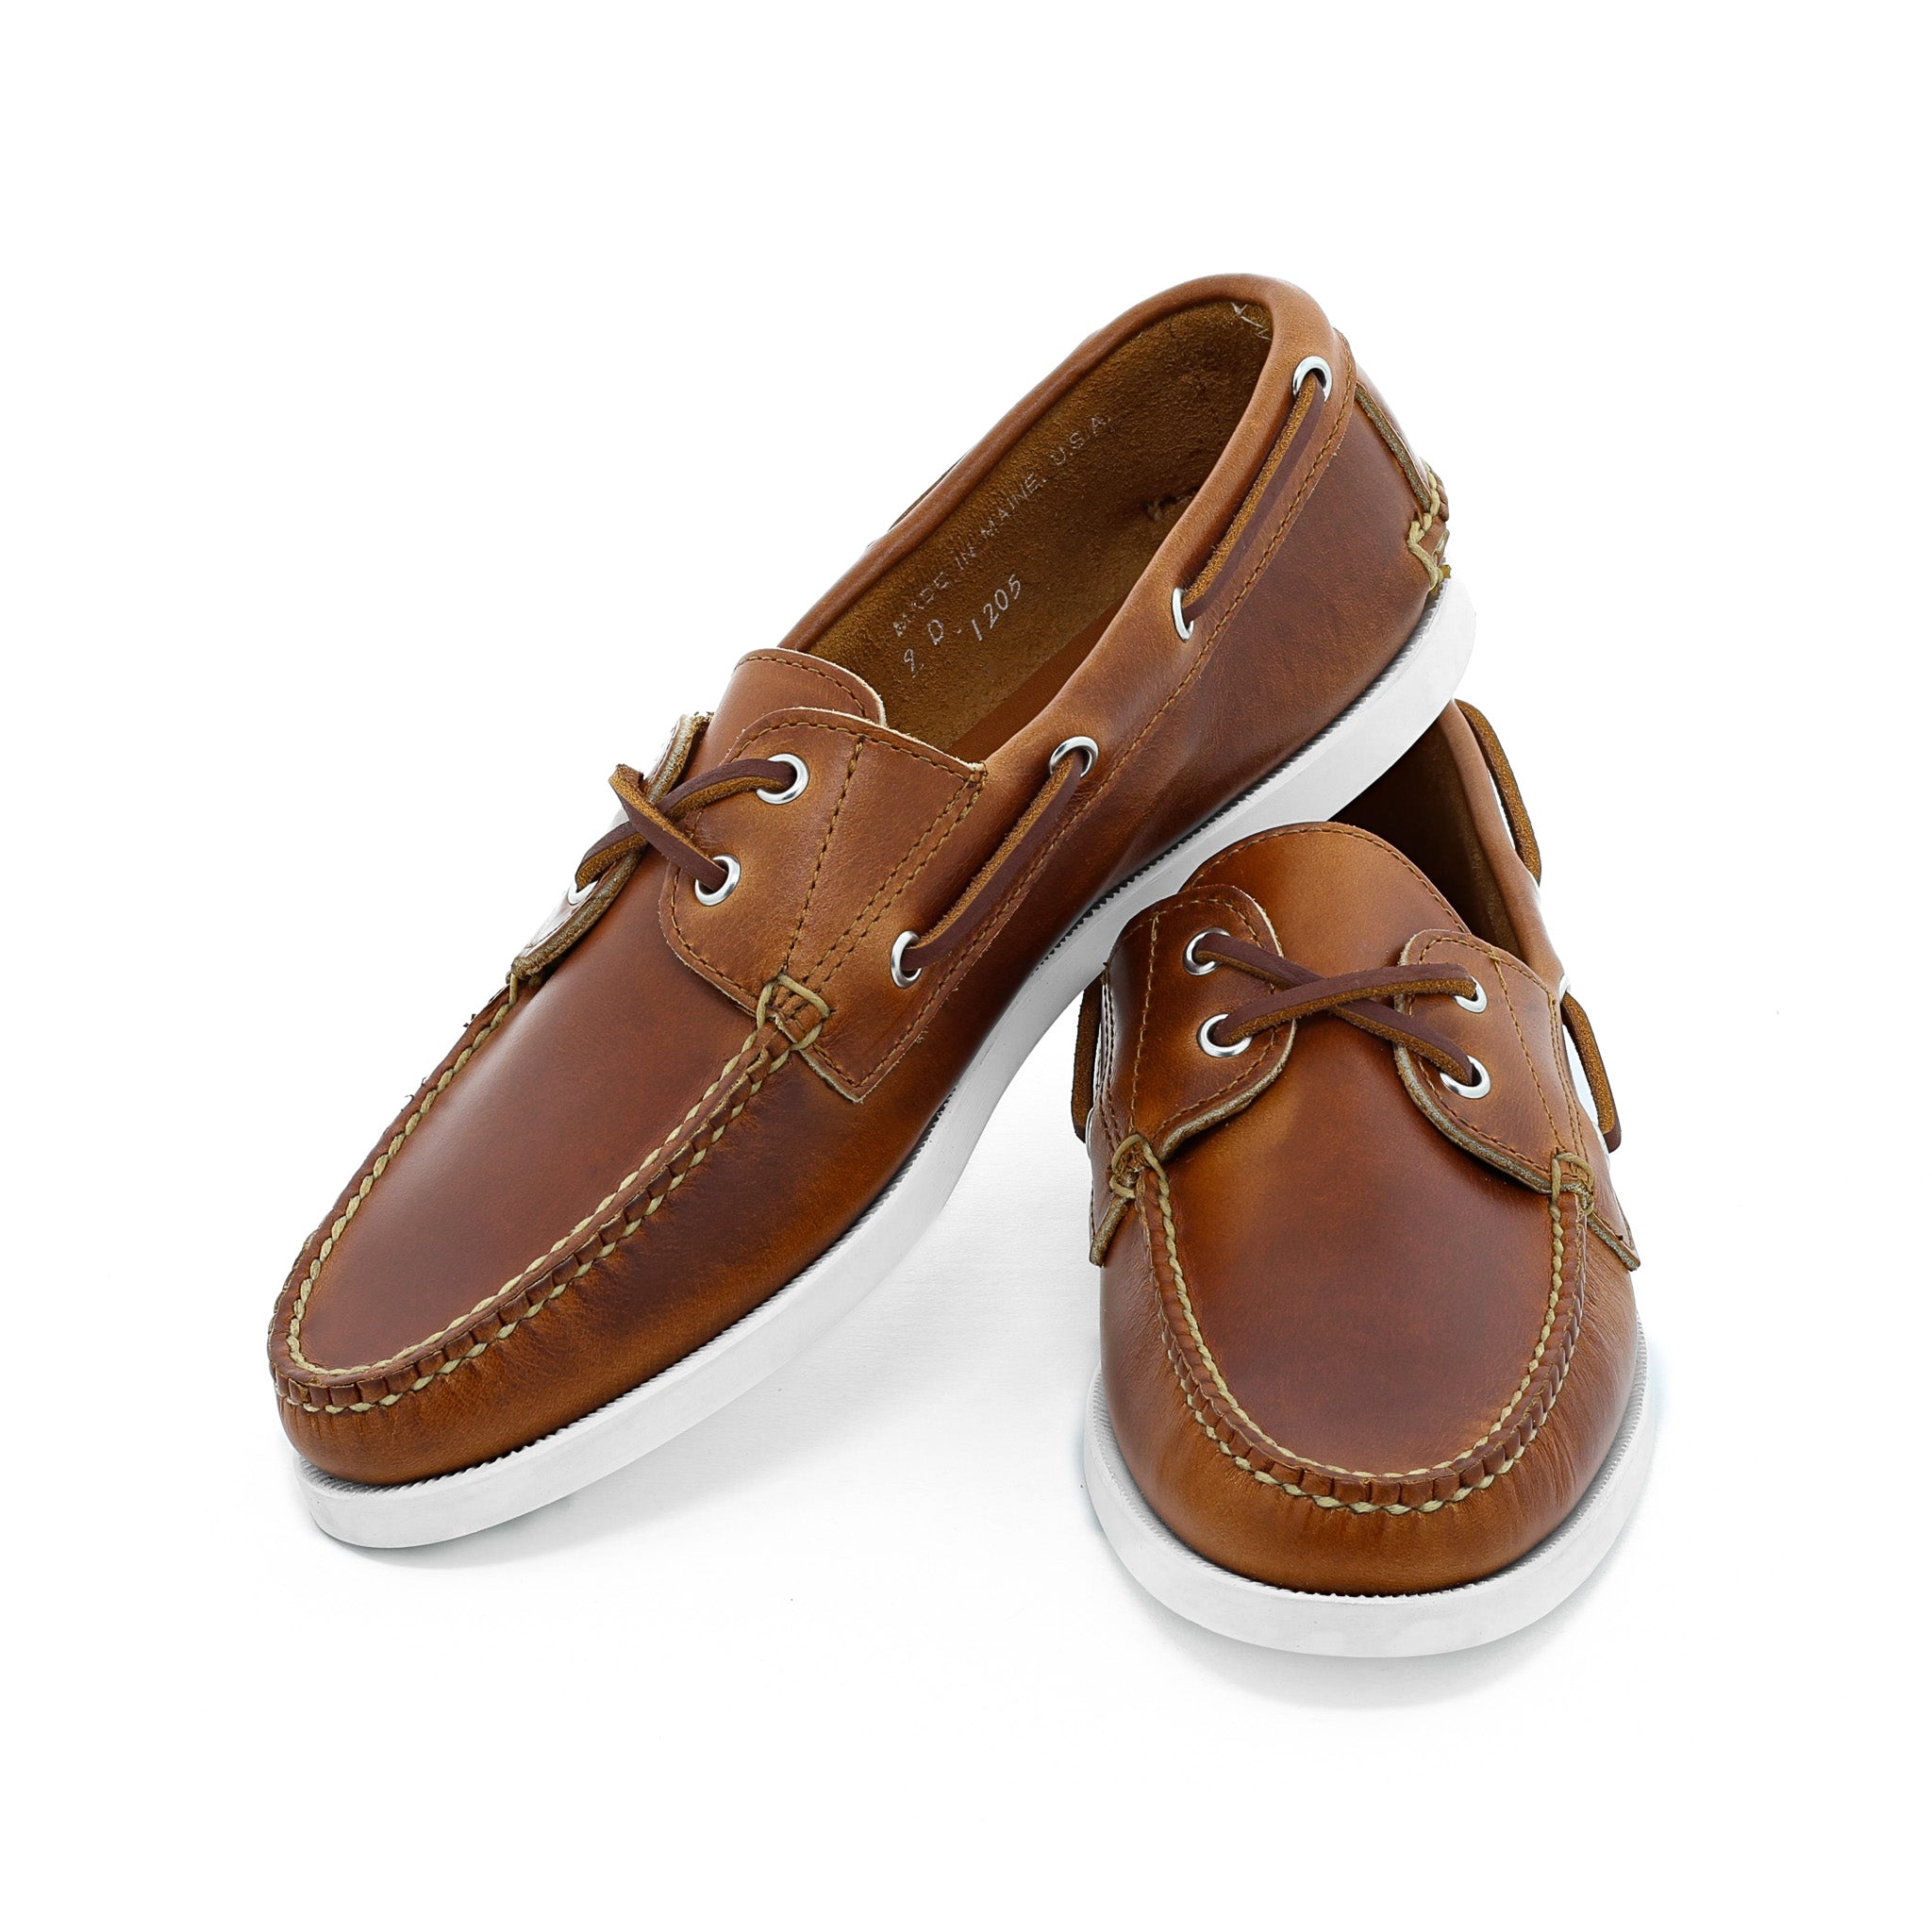 Dressing Up with Men's Boat Shoes